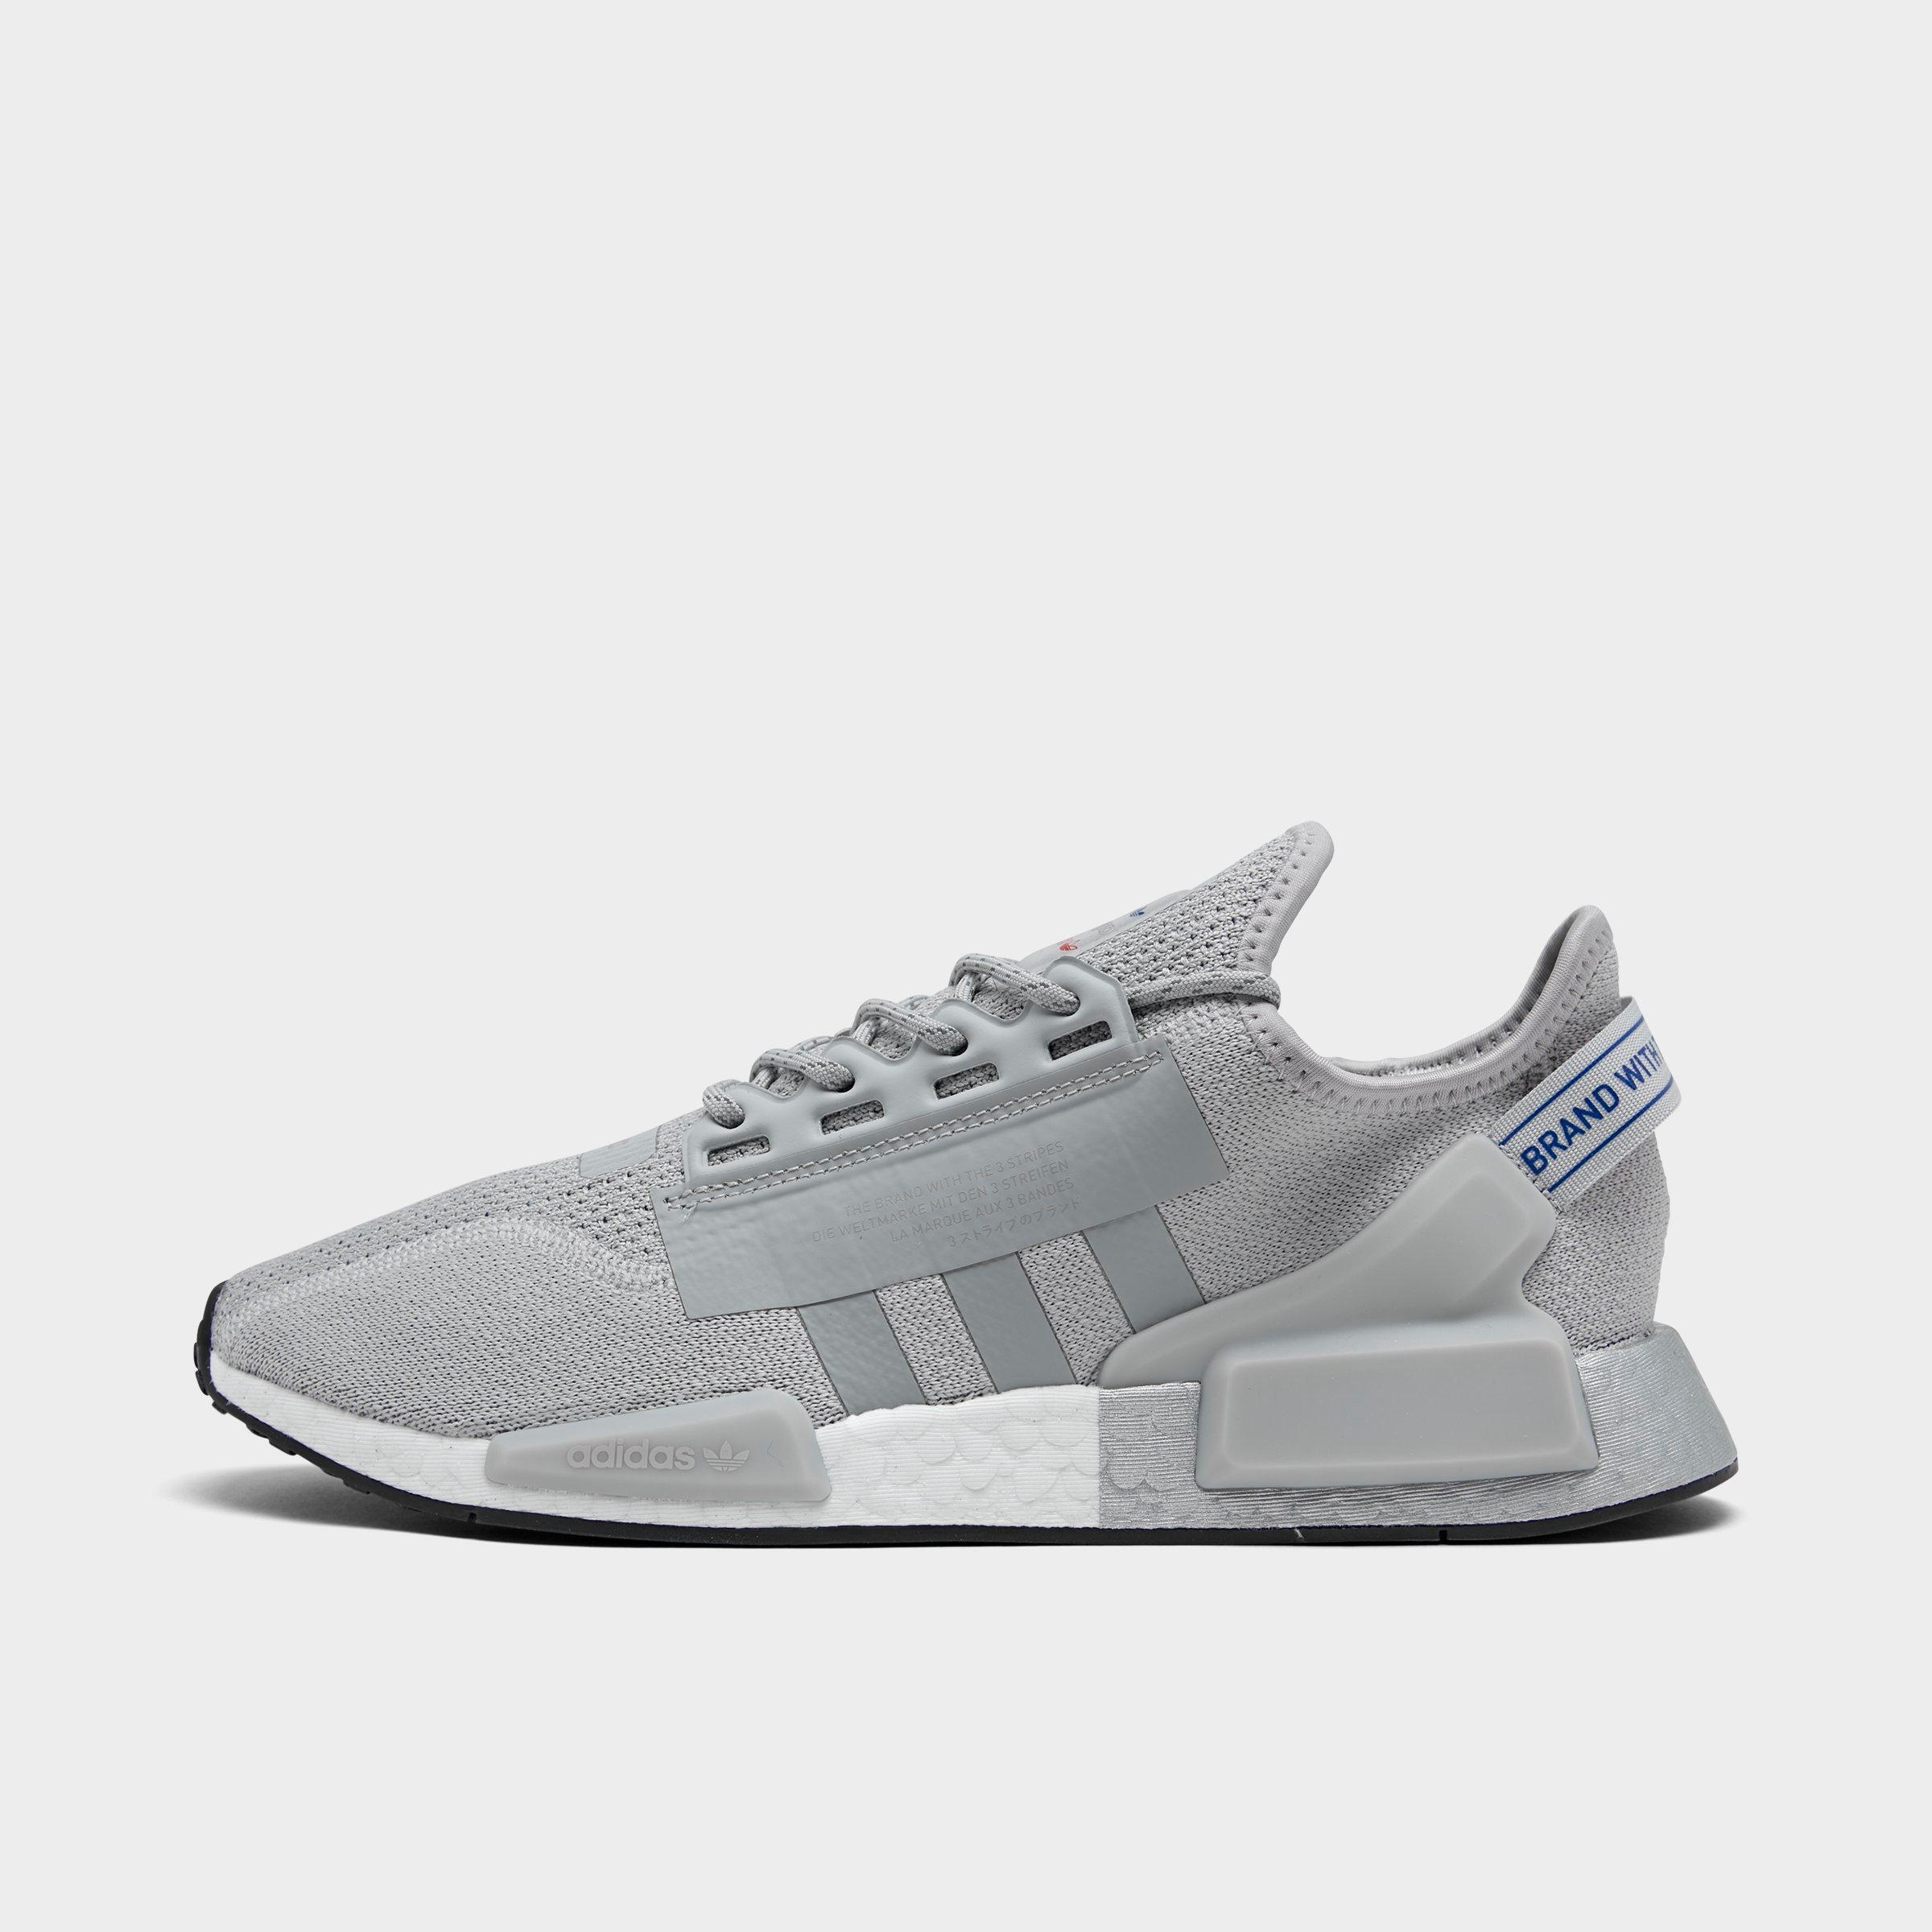 NMD_R1 V2 Homme JD Sports Homme Chaussures Baskets 